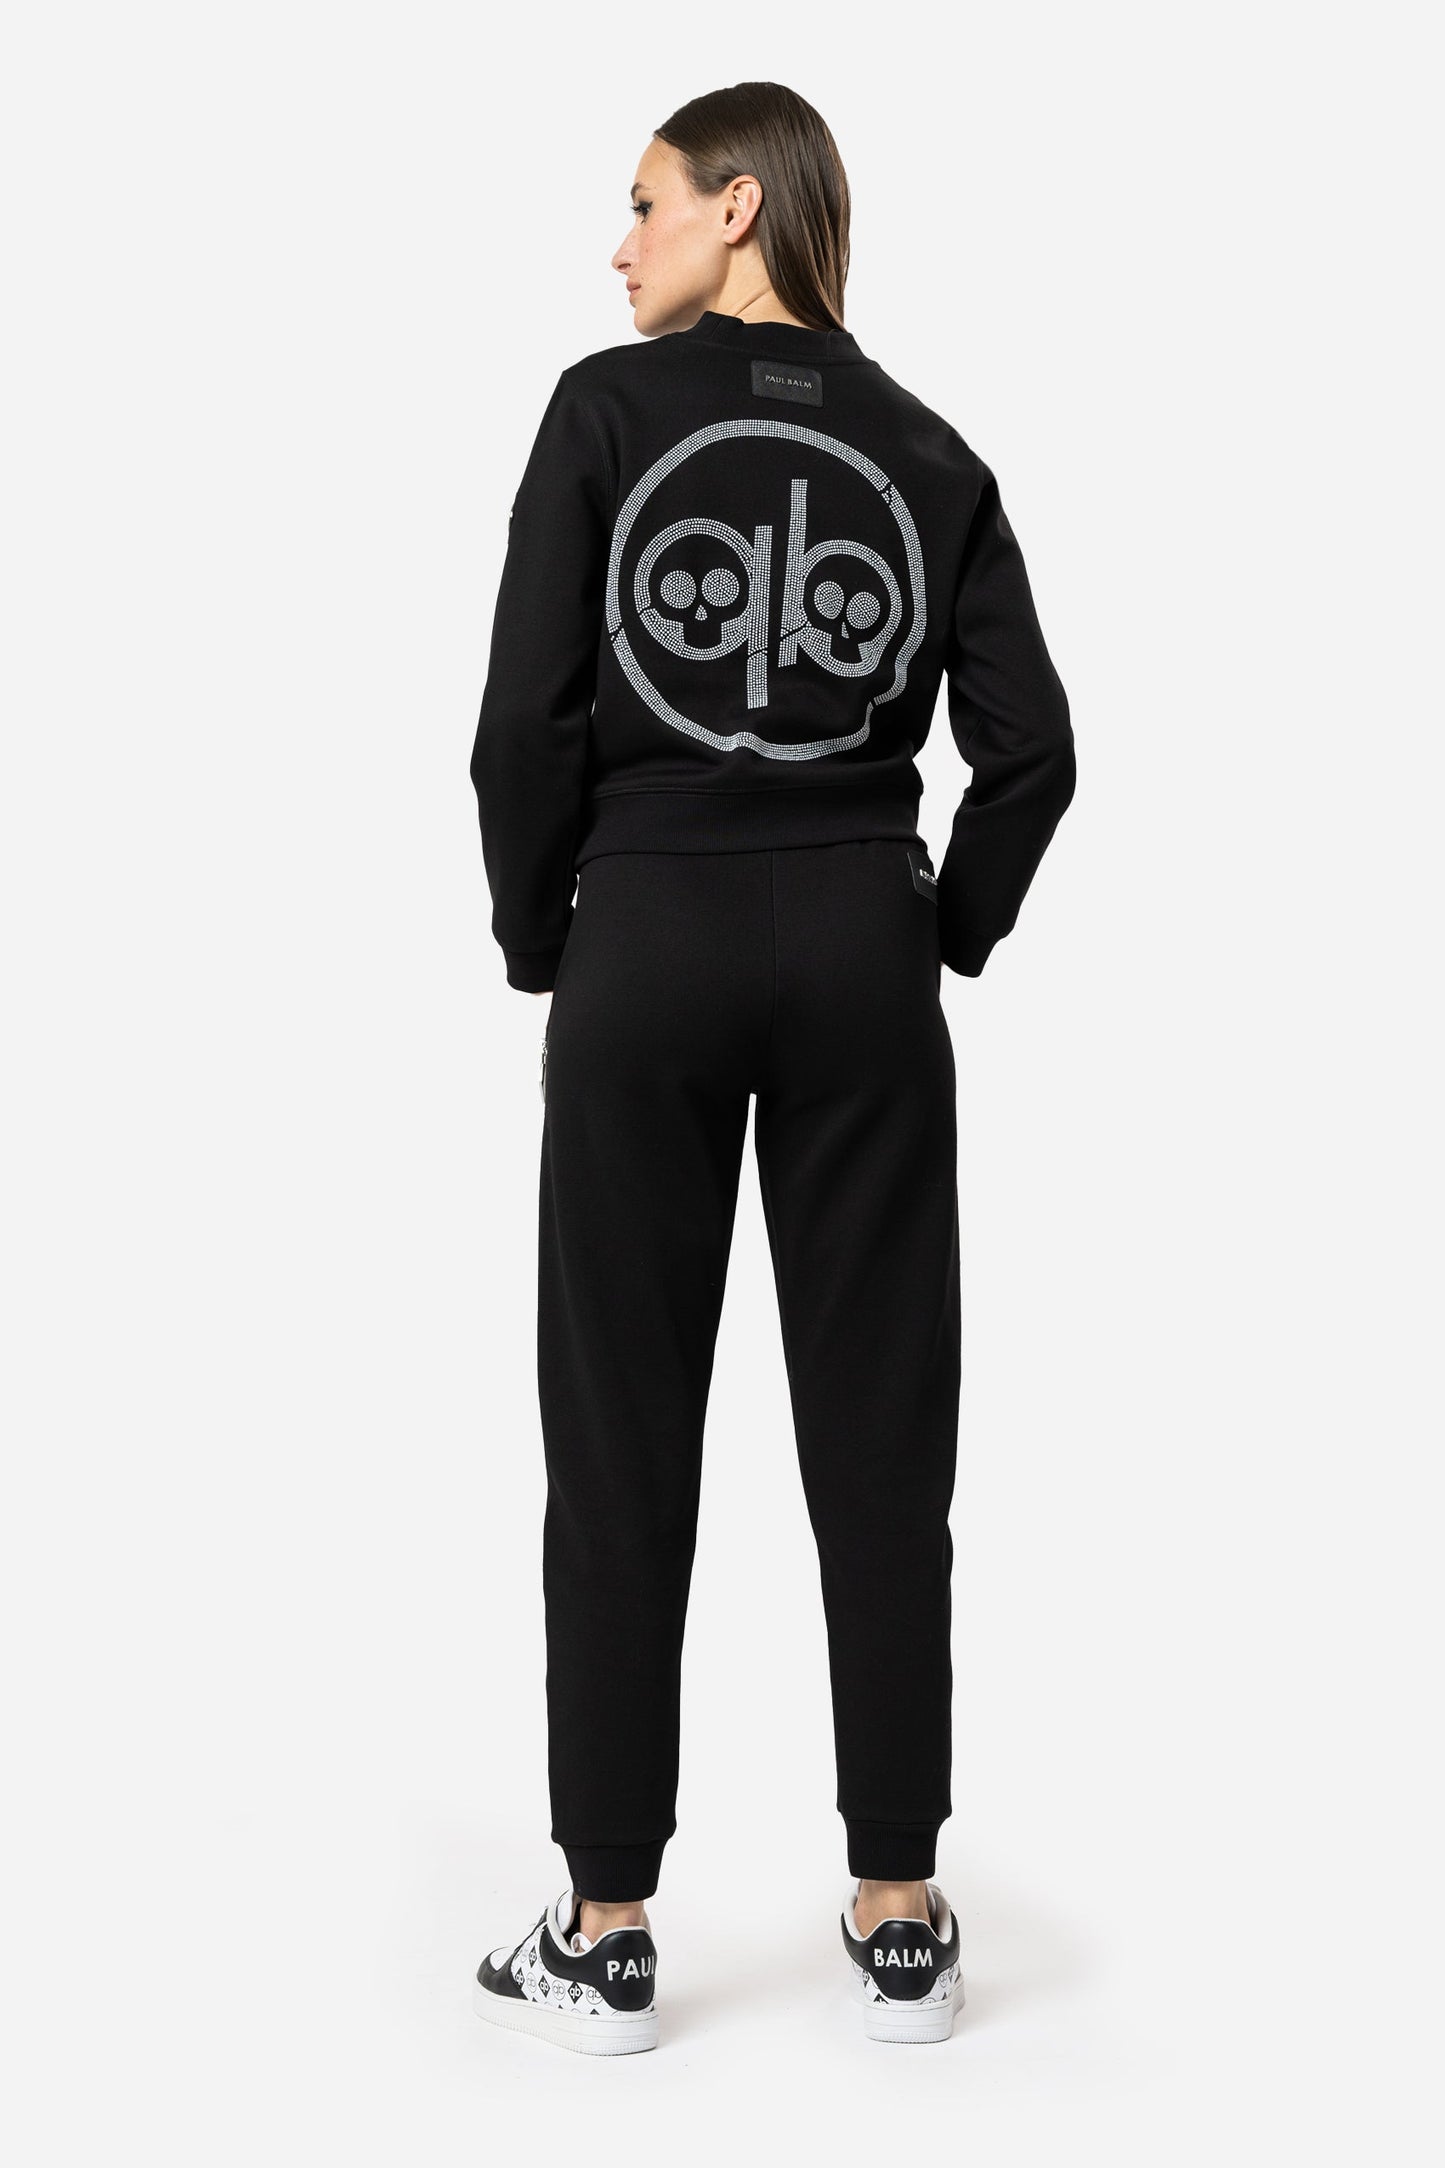 Scull Embroidery Sweatshirt - Limited to 300